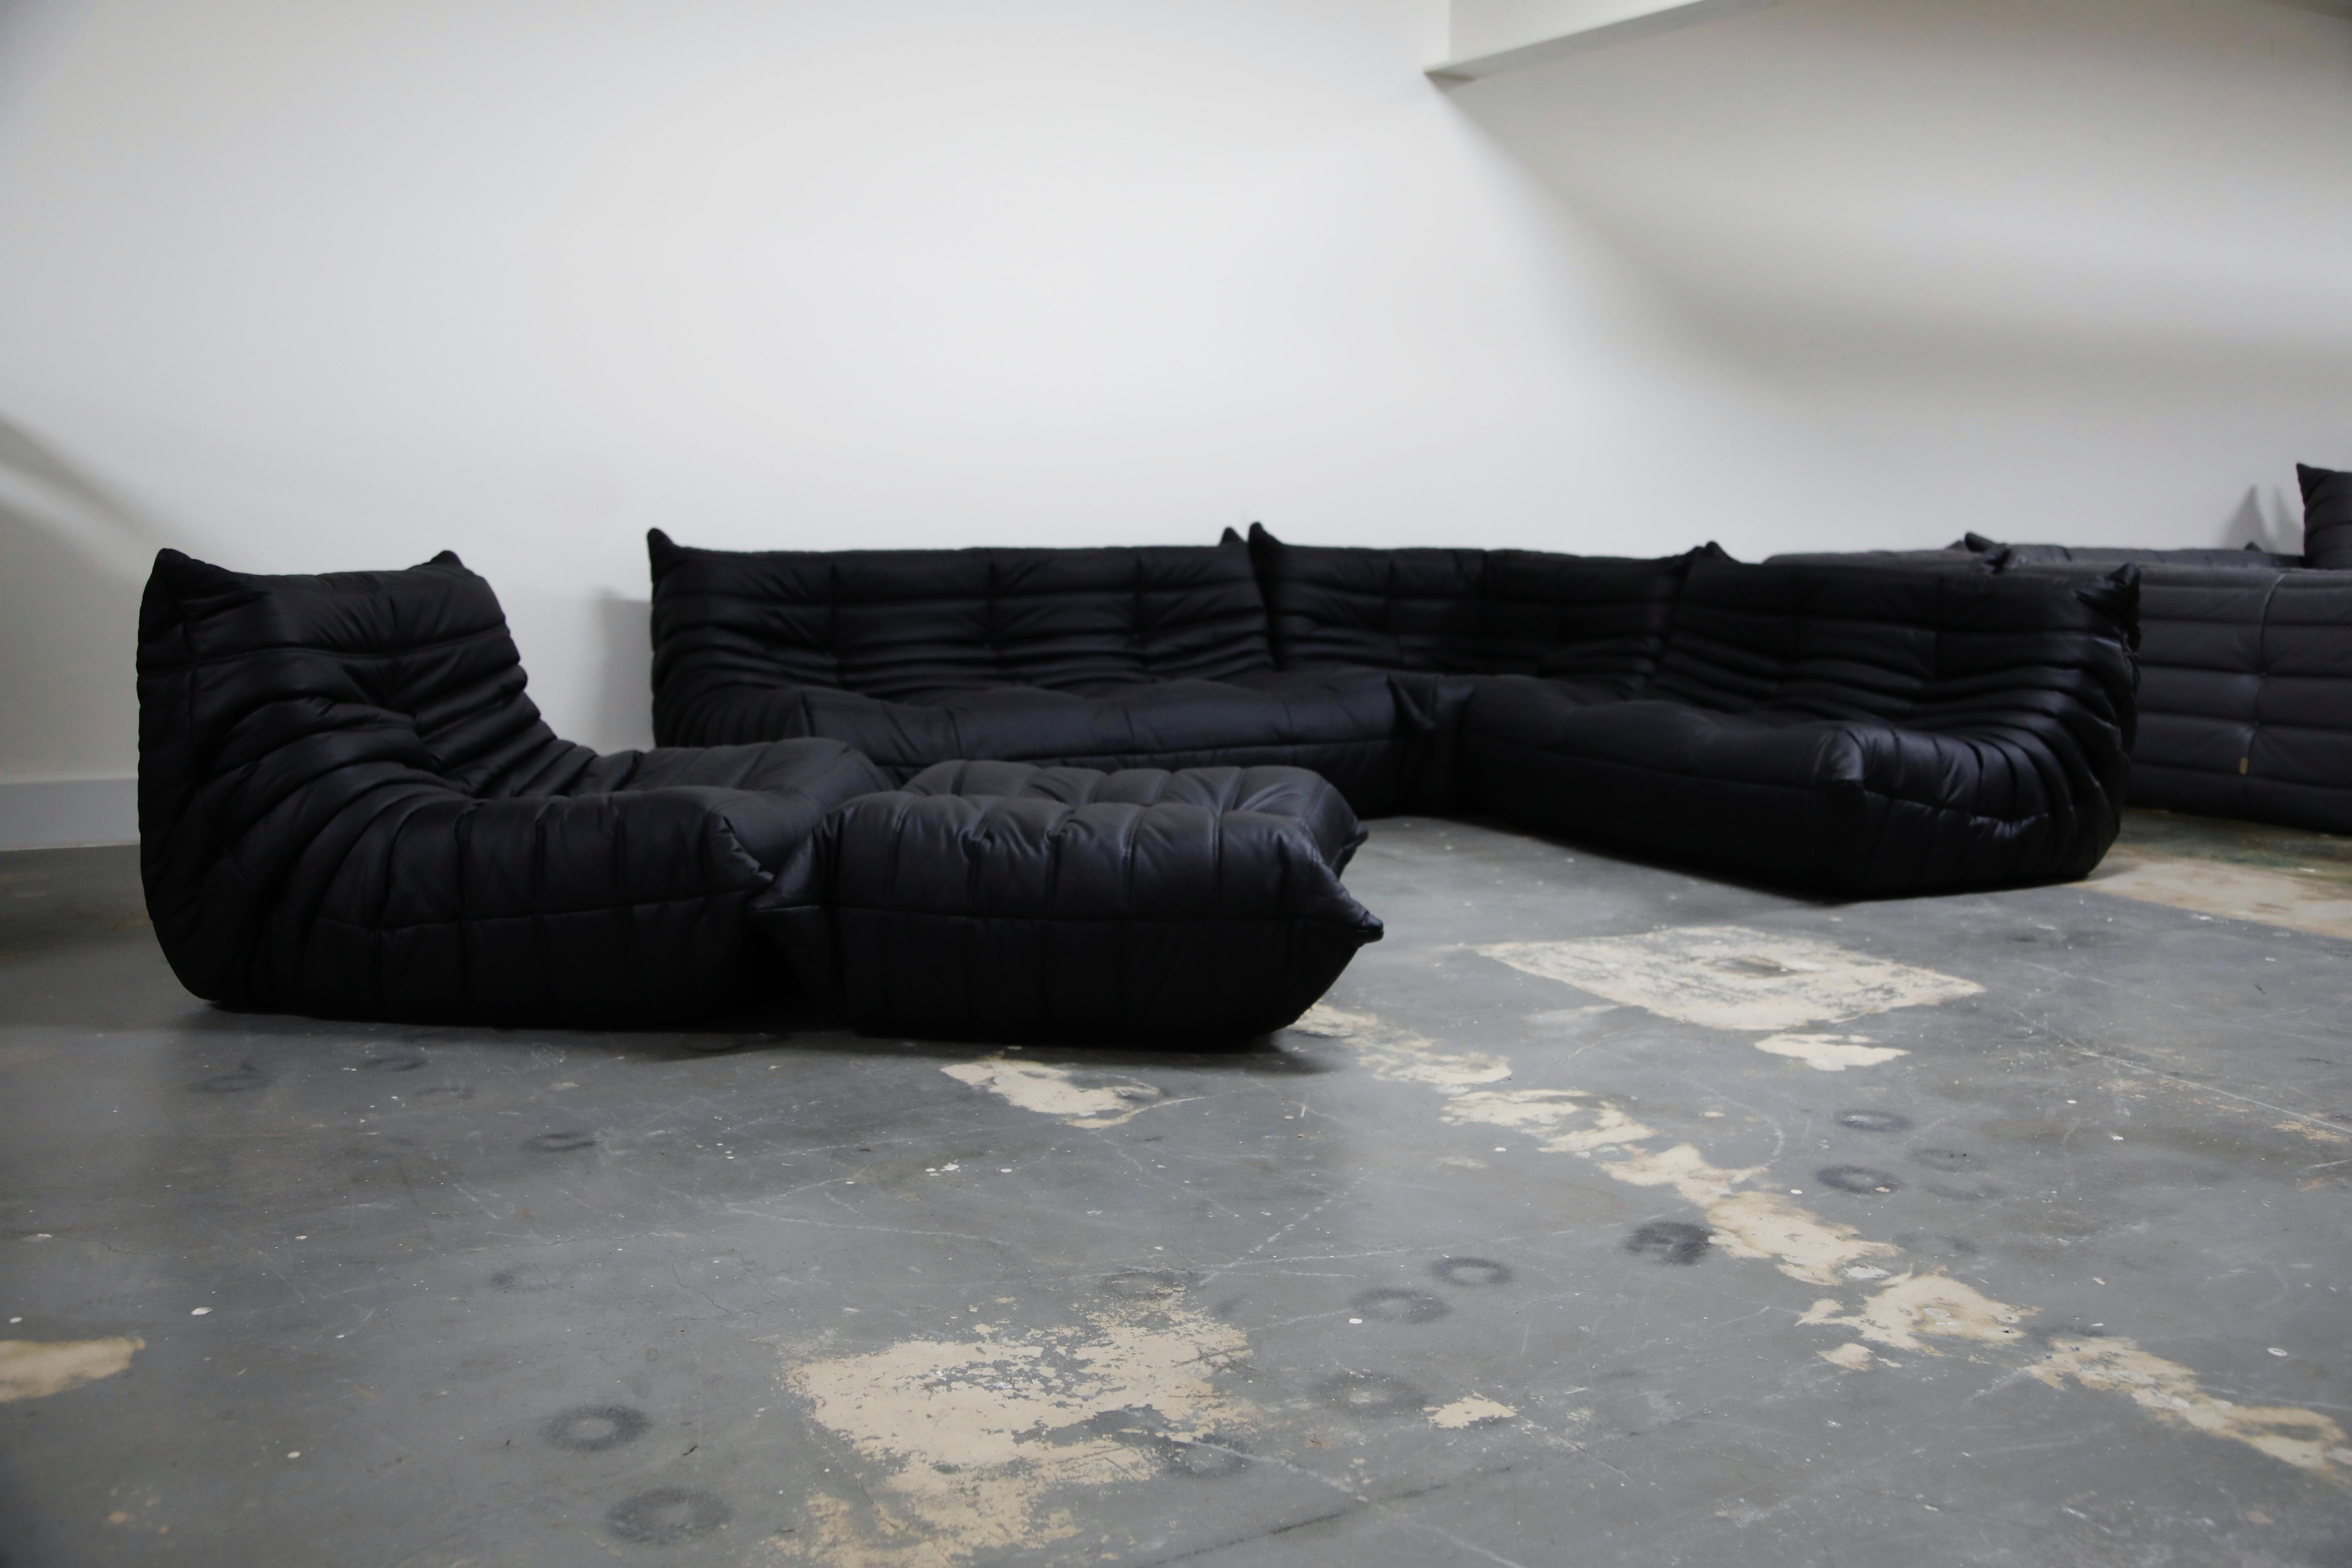 This incredible five (5) piece Togo sectional living room set, was designed by Michel Ducaroy in 1973 for Ligne Roset, France. This set was completely restored with new high grade Bovine leather upholstery in a soft black color, and bottom decking